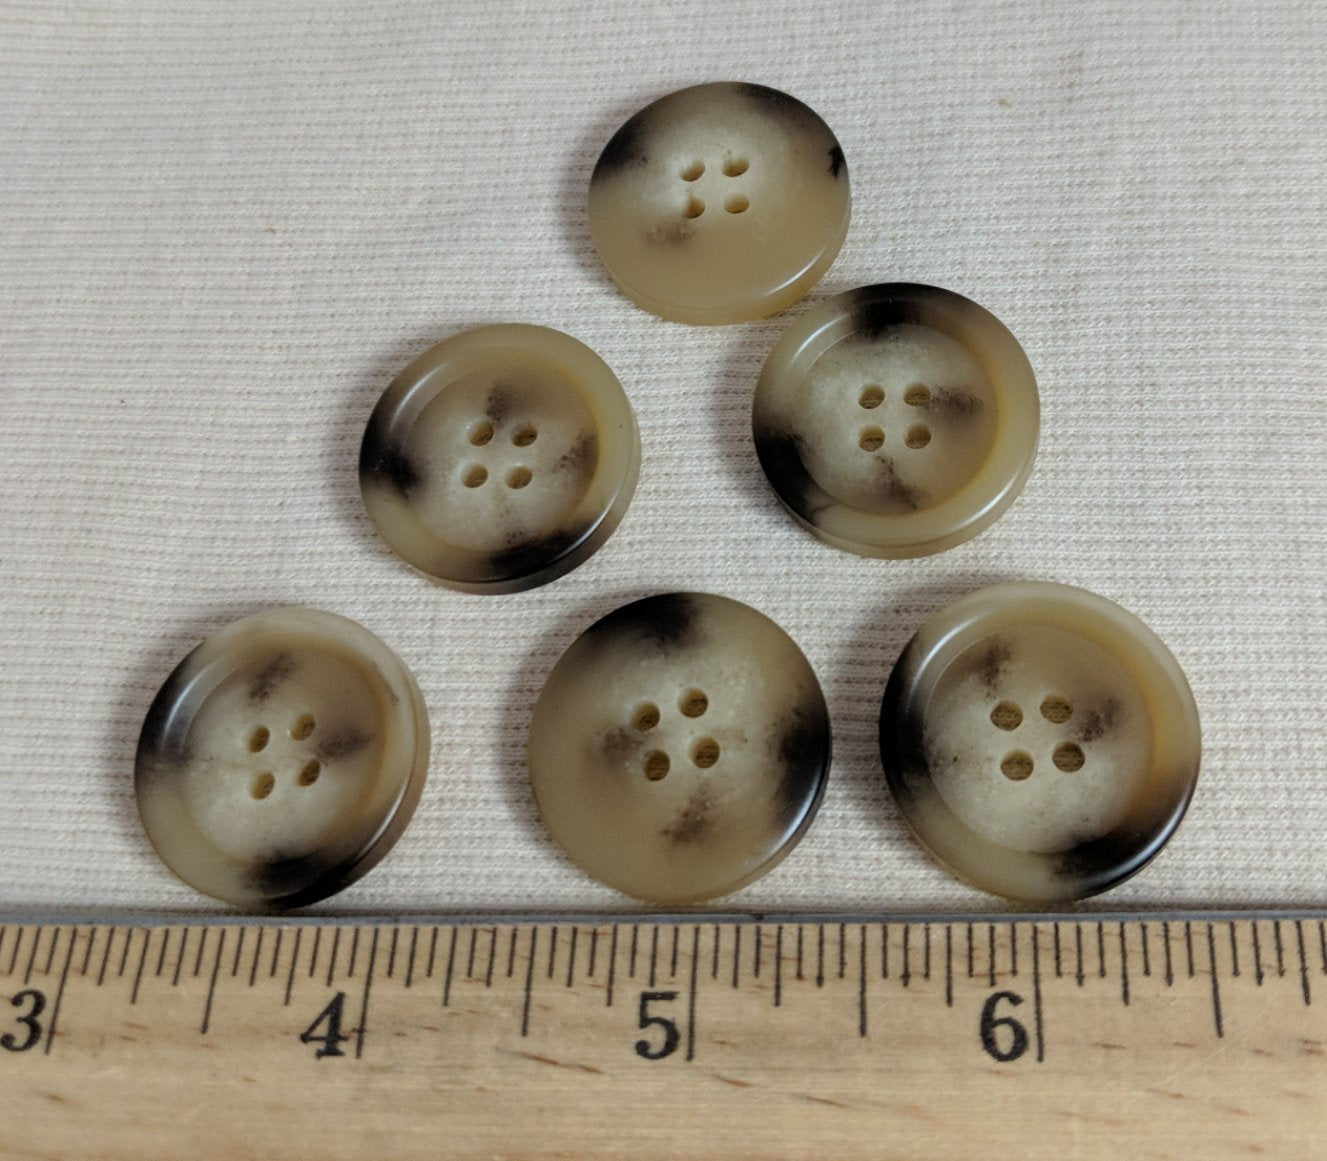 Brown Button 14L Button 4 Hole Round Button Buttons for Craft Heavy Duty Sleeve Buttons Collar Shirt Buttons Pack of 12